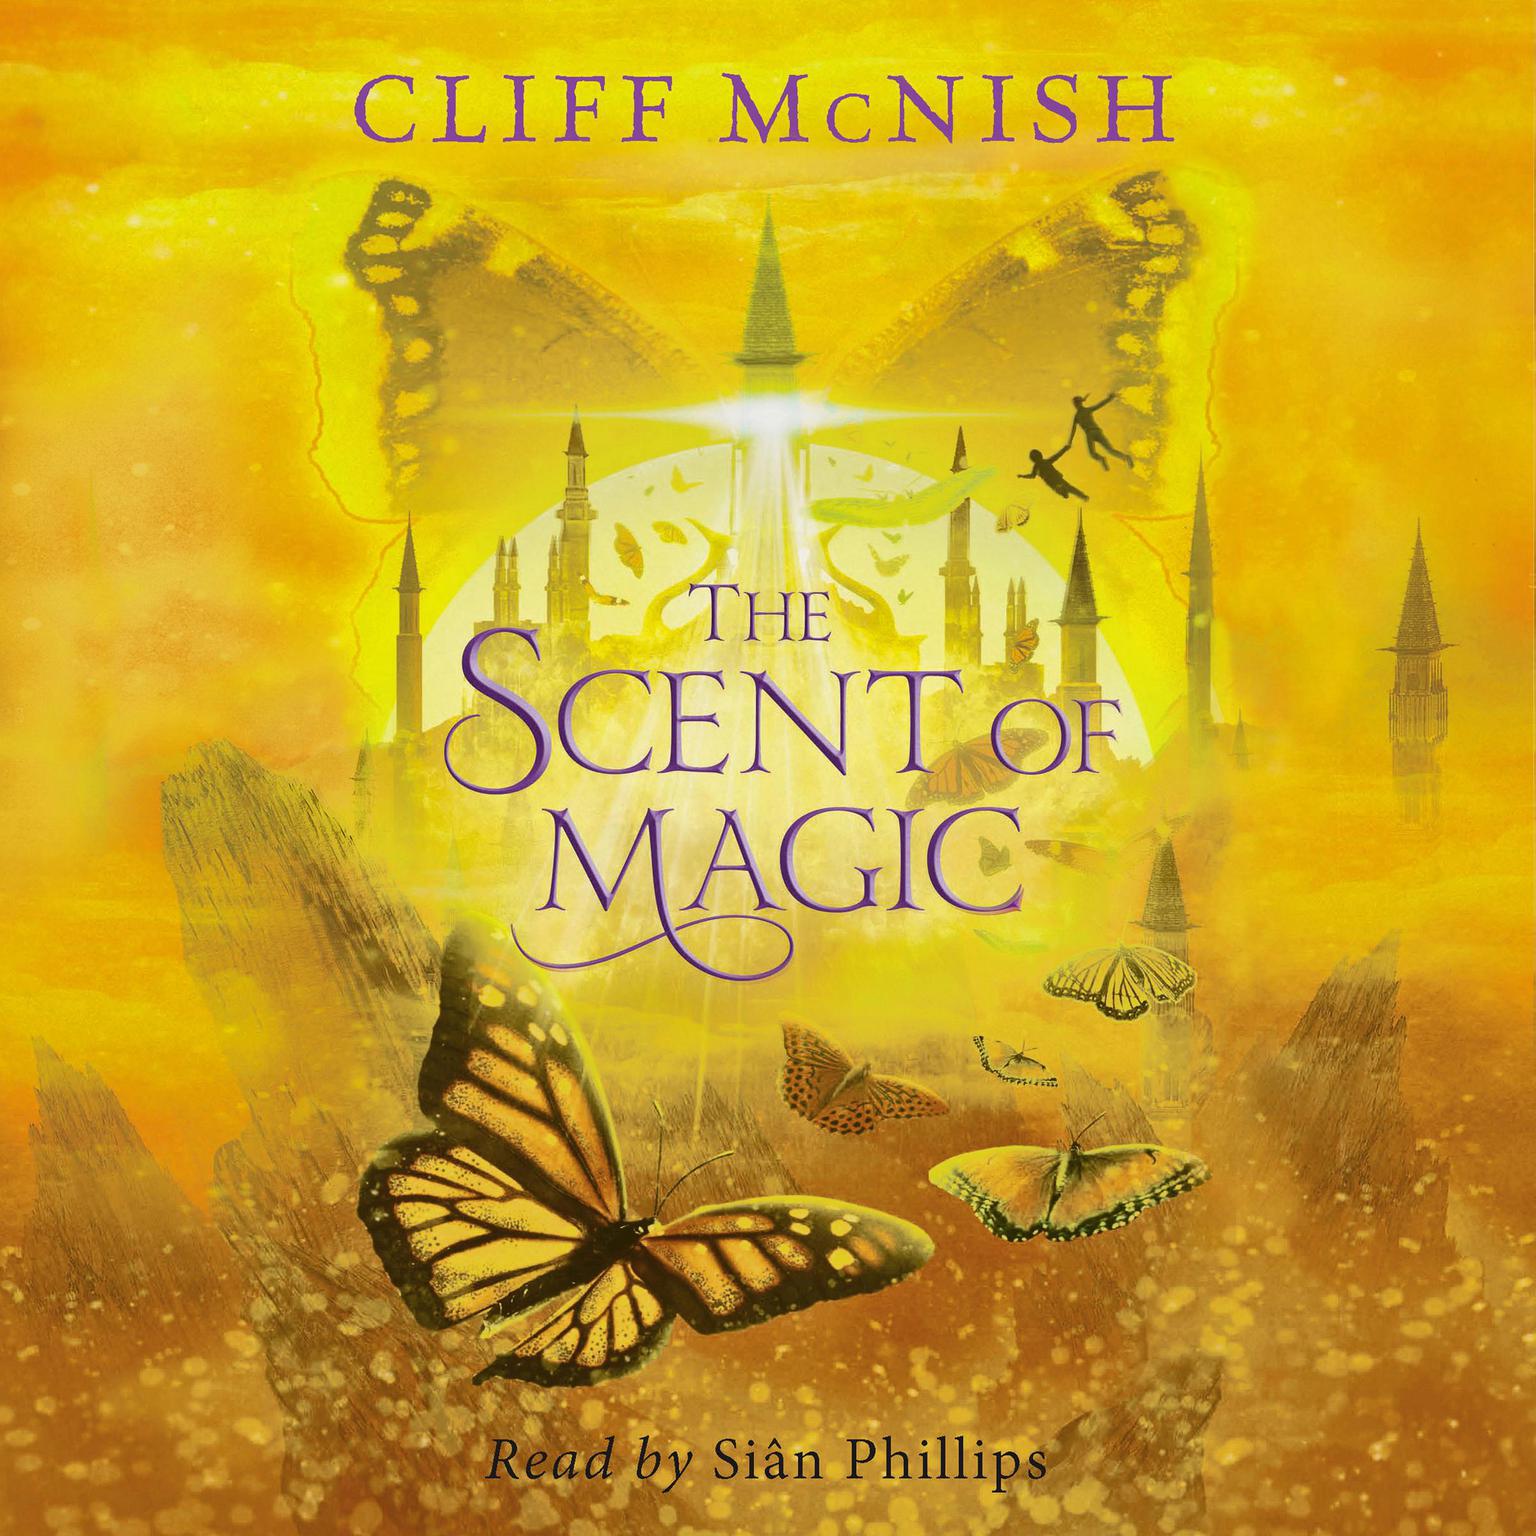 The Scent of Magic (The Doomspell Trilogy Book 2) (Abridged) Audiobook, by Cliff McNish